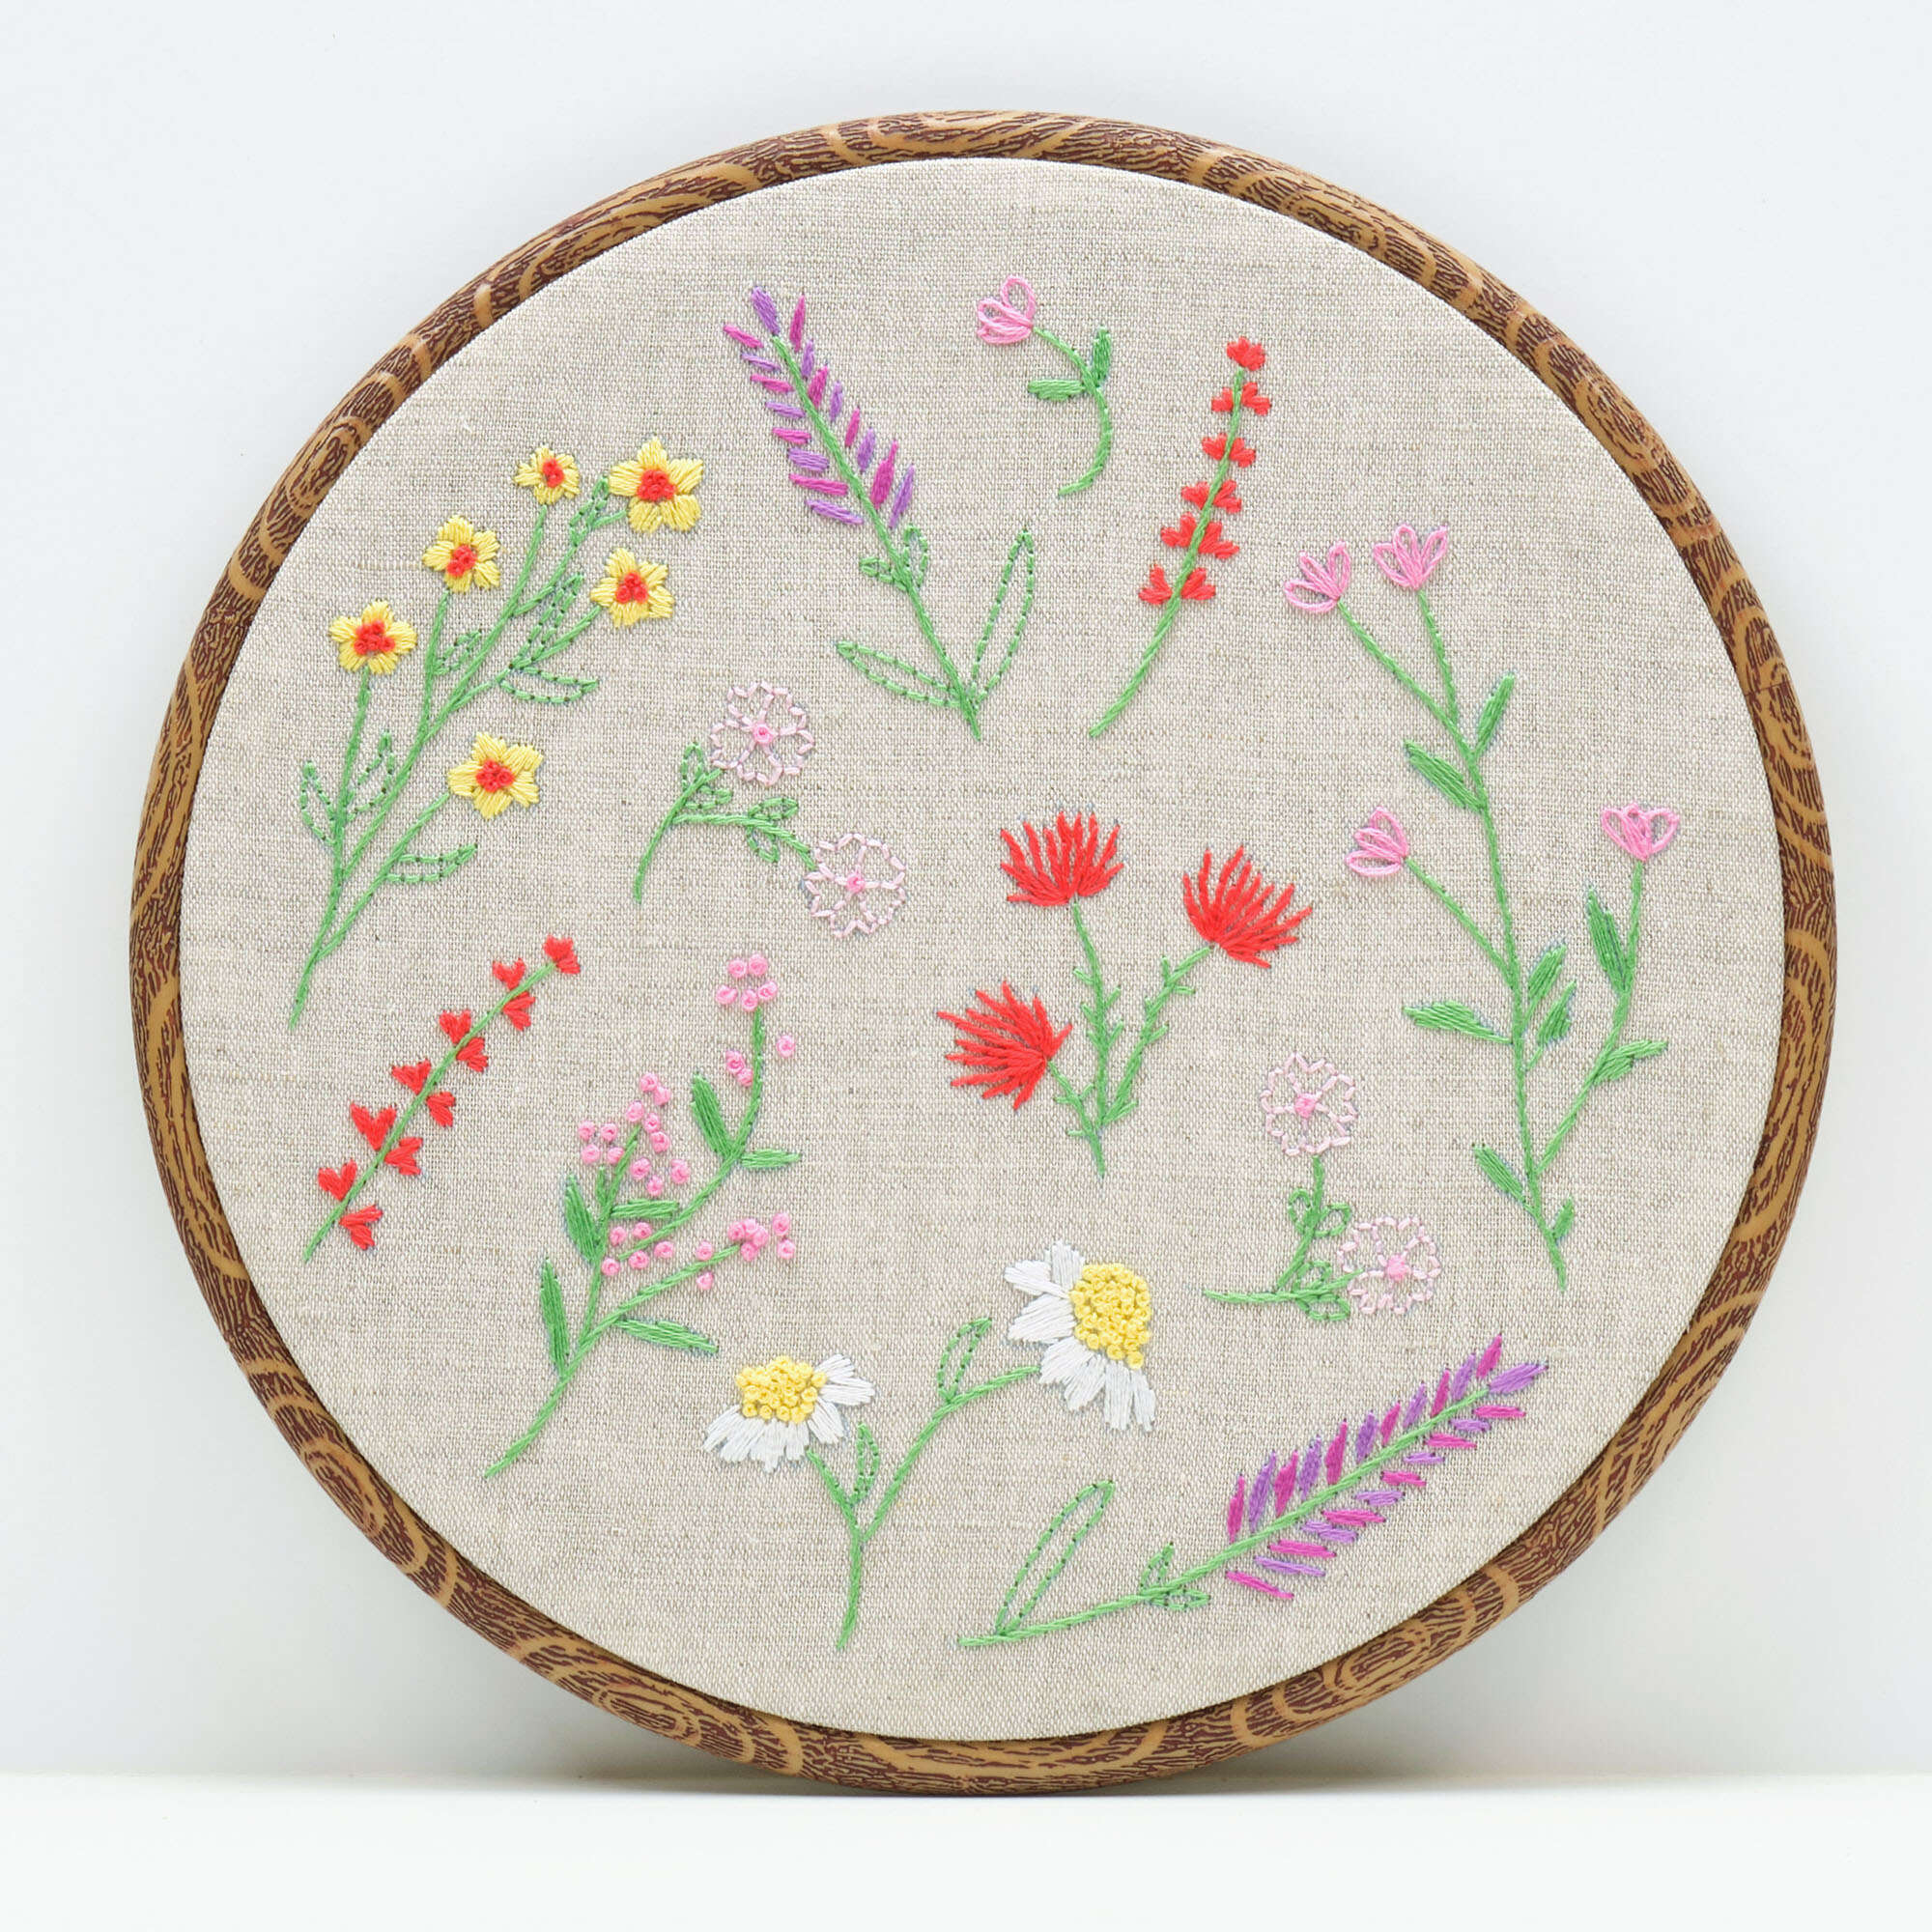 MY CRAFT WORKS: Floral Embroidery Heart finish - Part 2